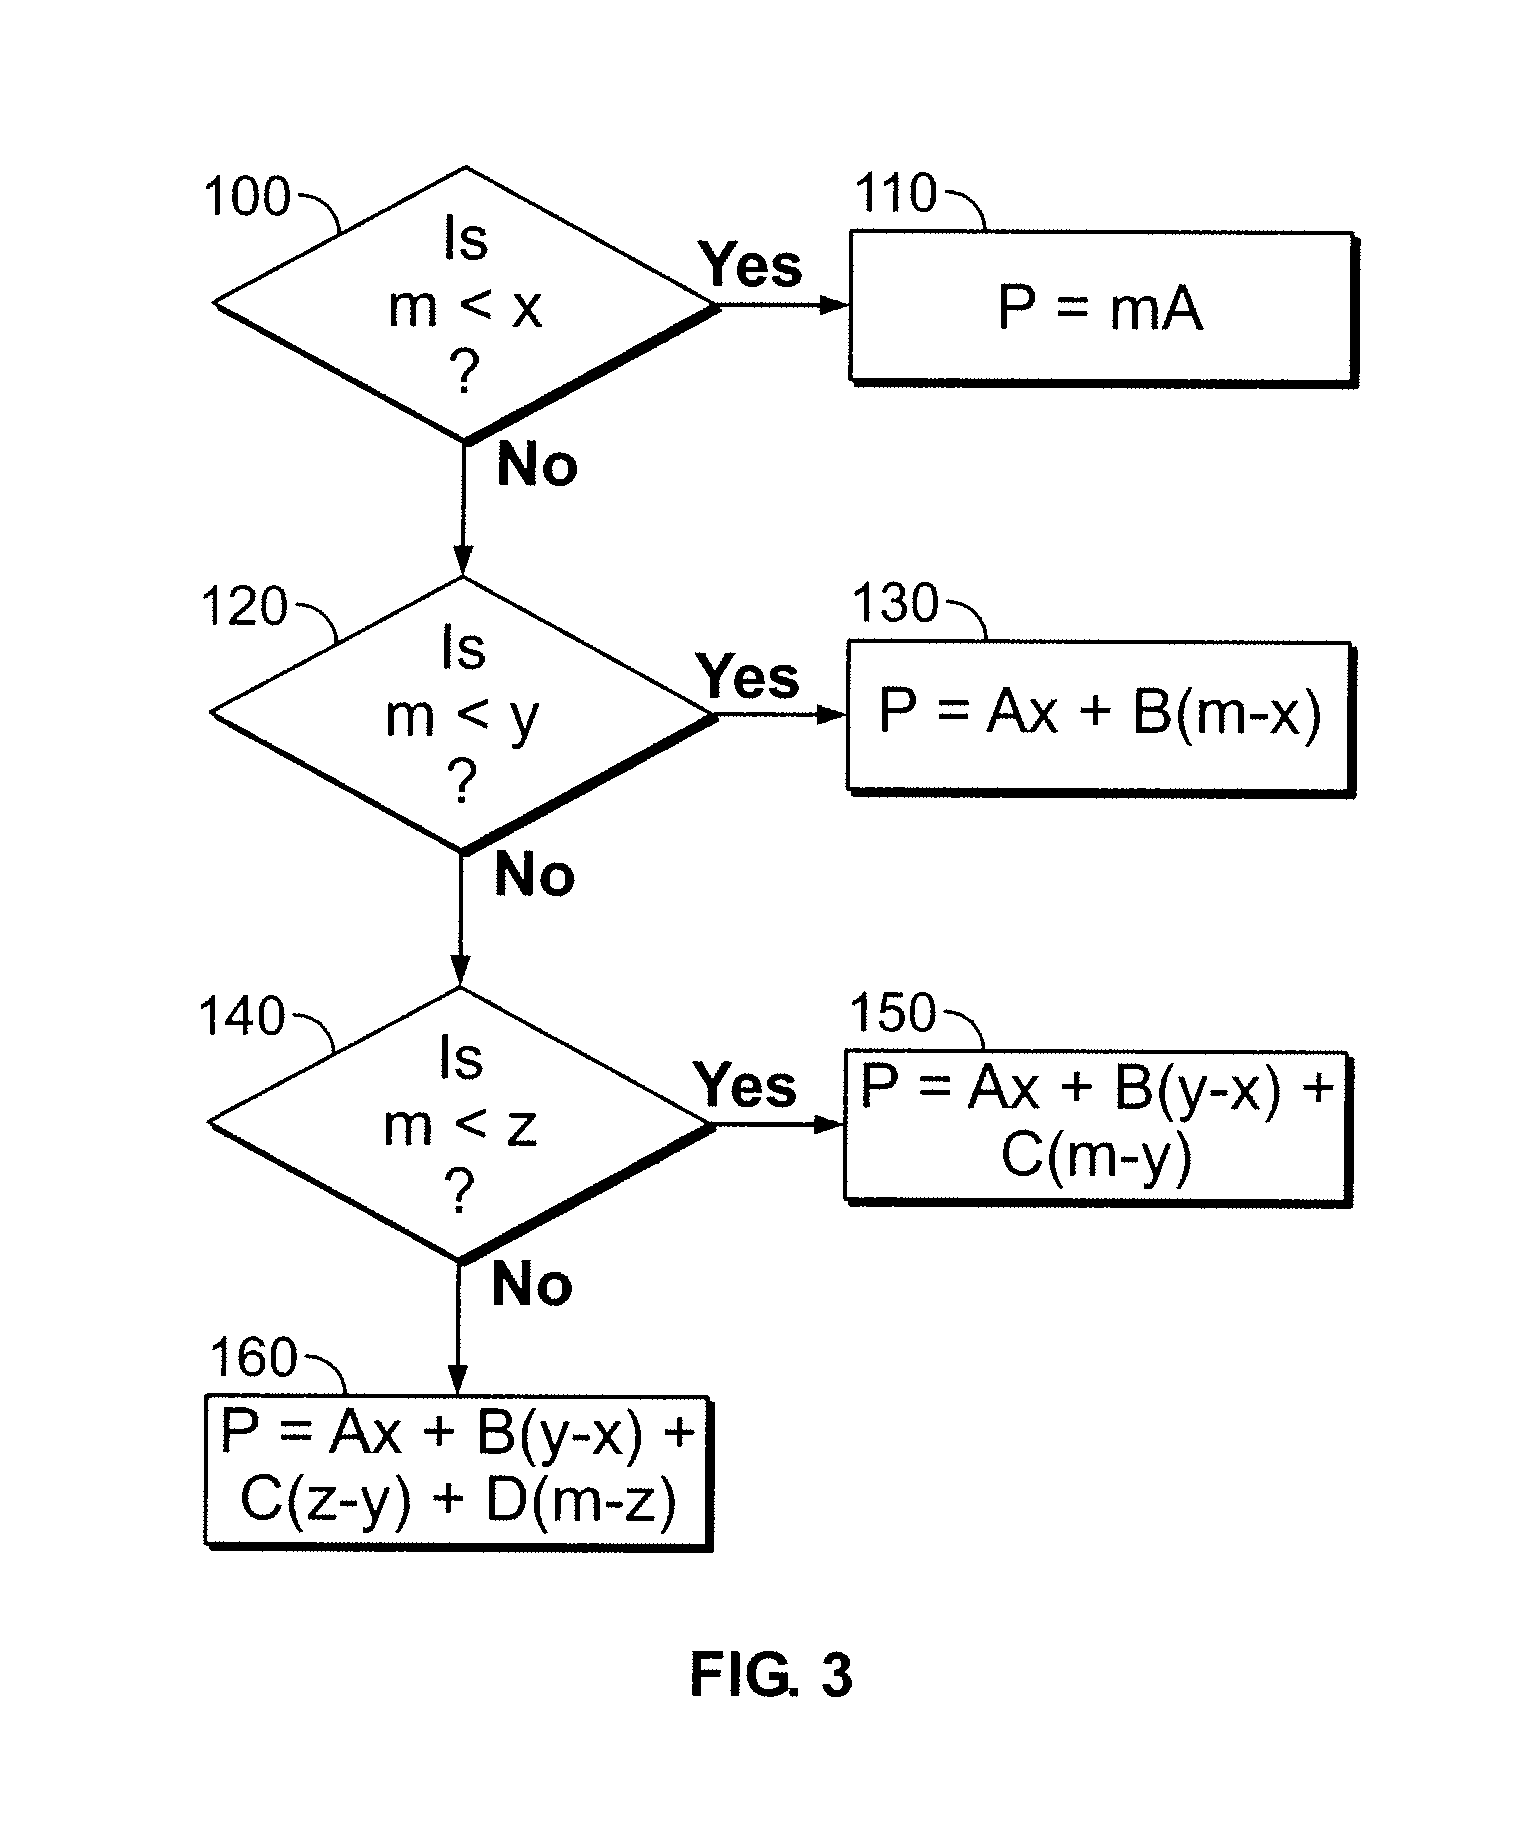 Usage-based insurance cost determination system and method